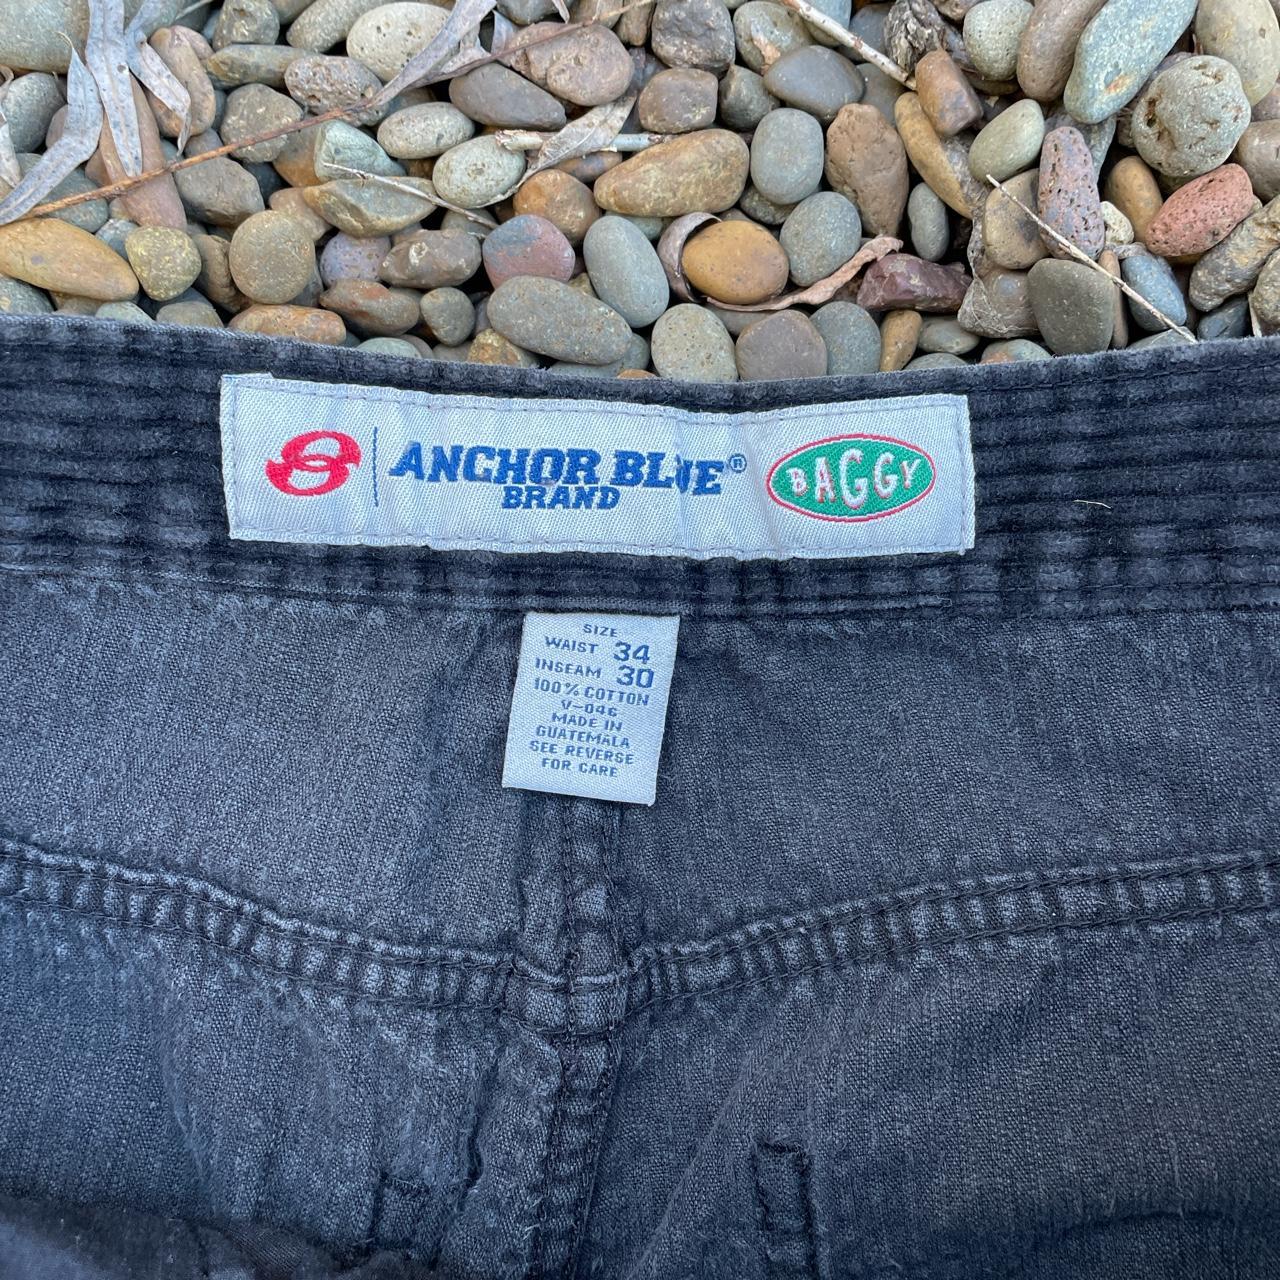 Anchor Blue Baggy Corduroy Pants 34x30 Thrifted,... - Depop